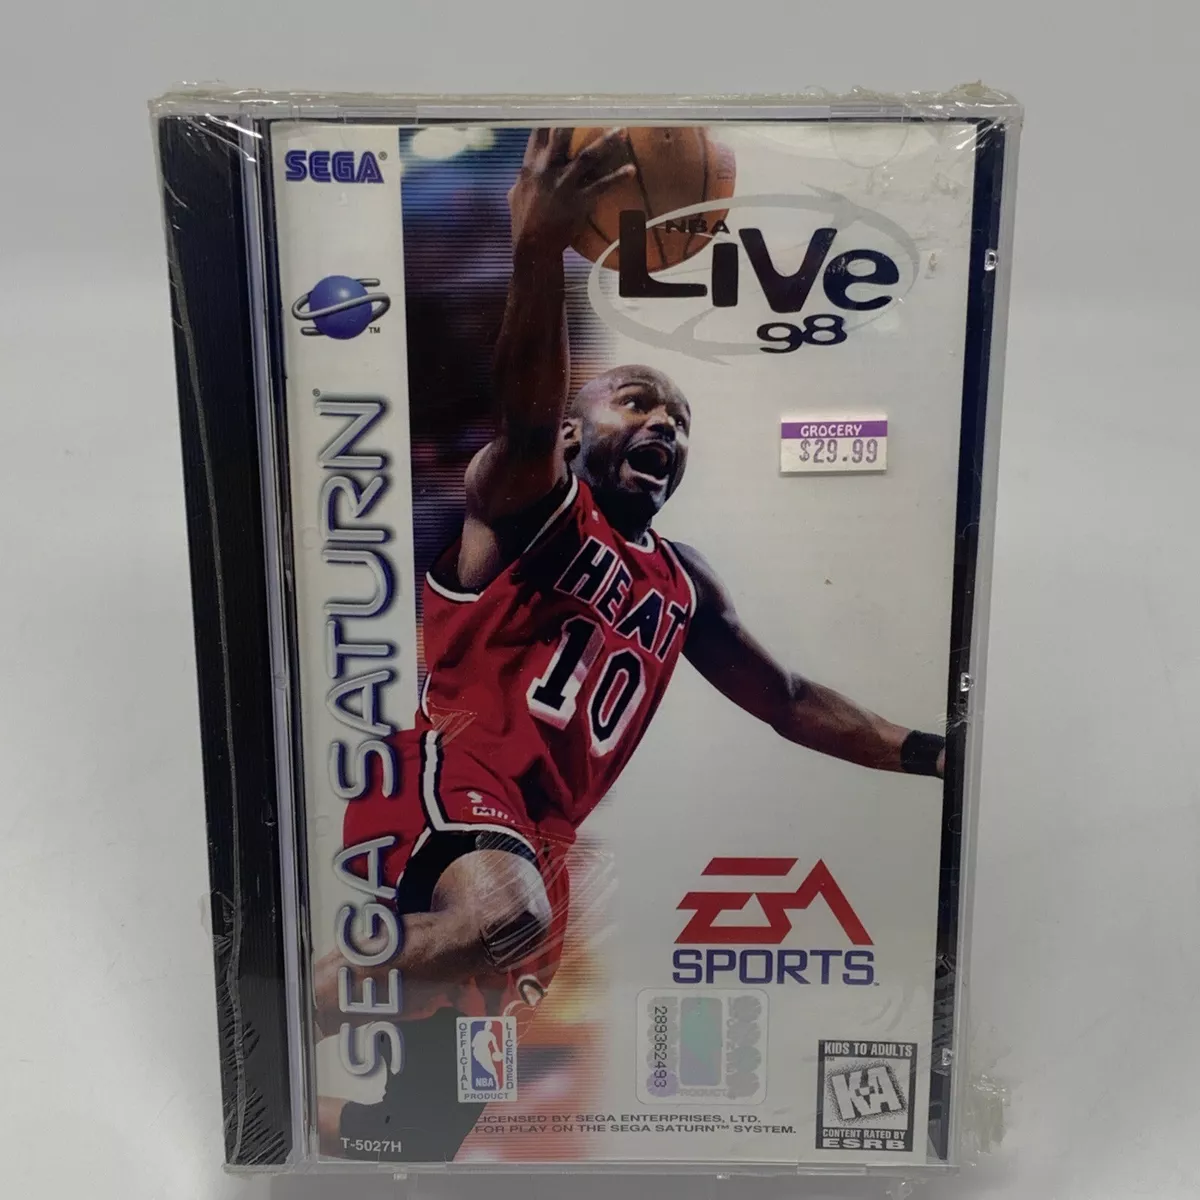 NBA Live 98 for the Sega Saturn (Sat) New, Factory Sealed (Torn seal) Authentic 14633078411 eBay